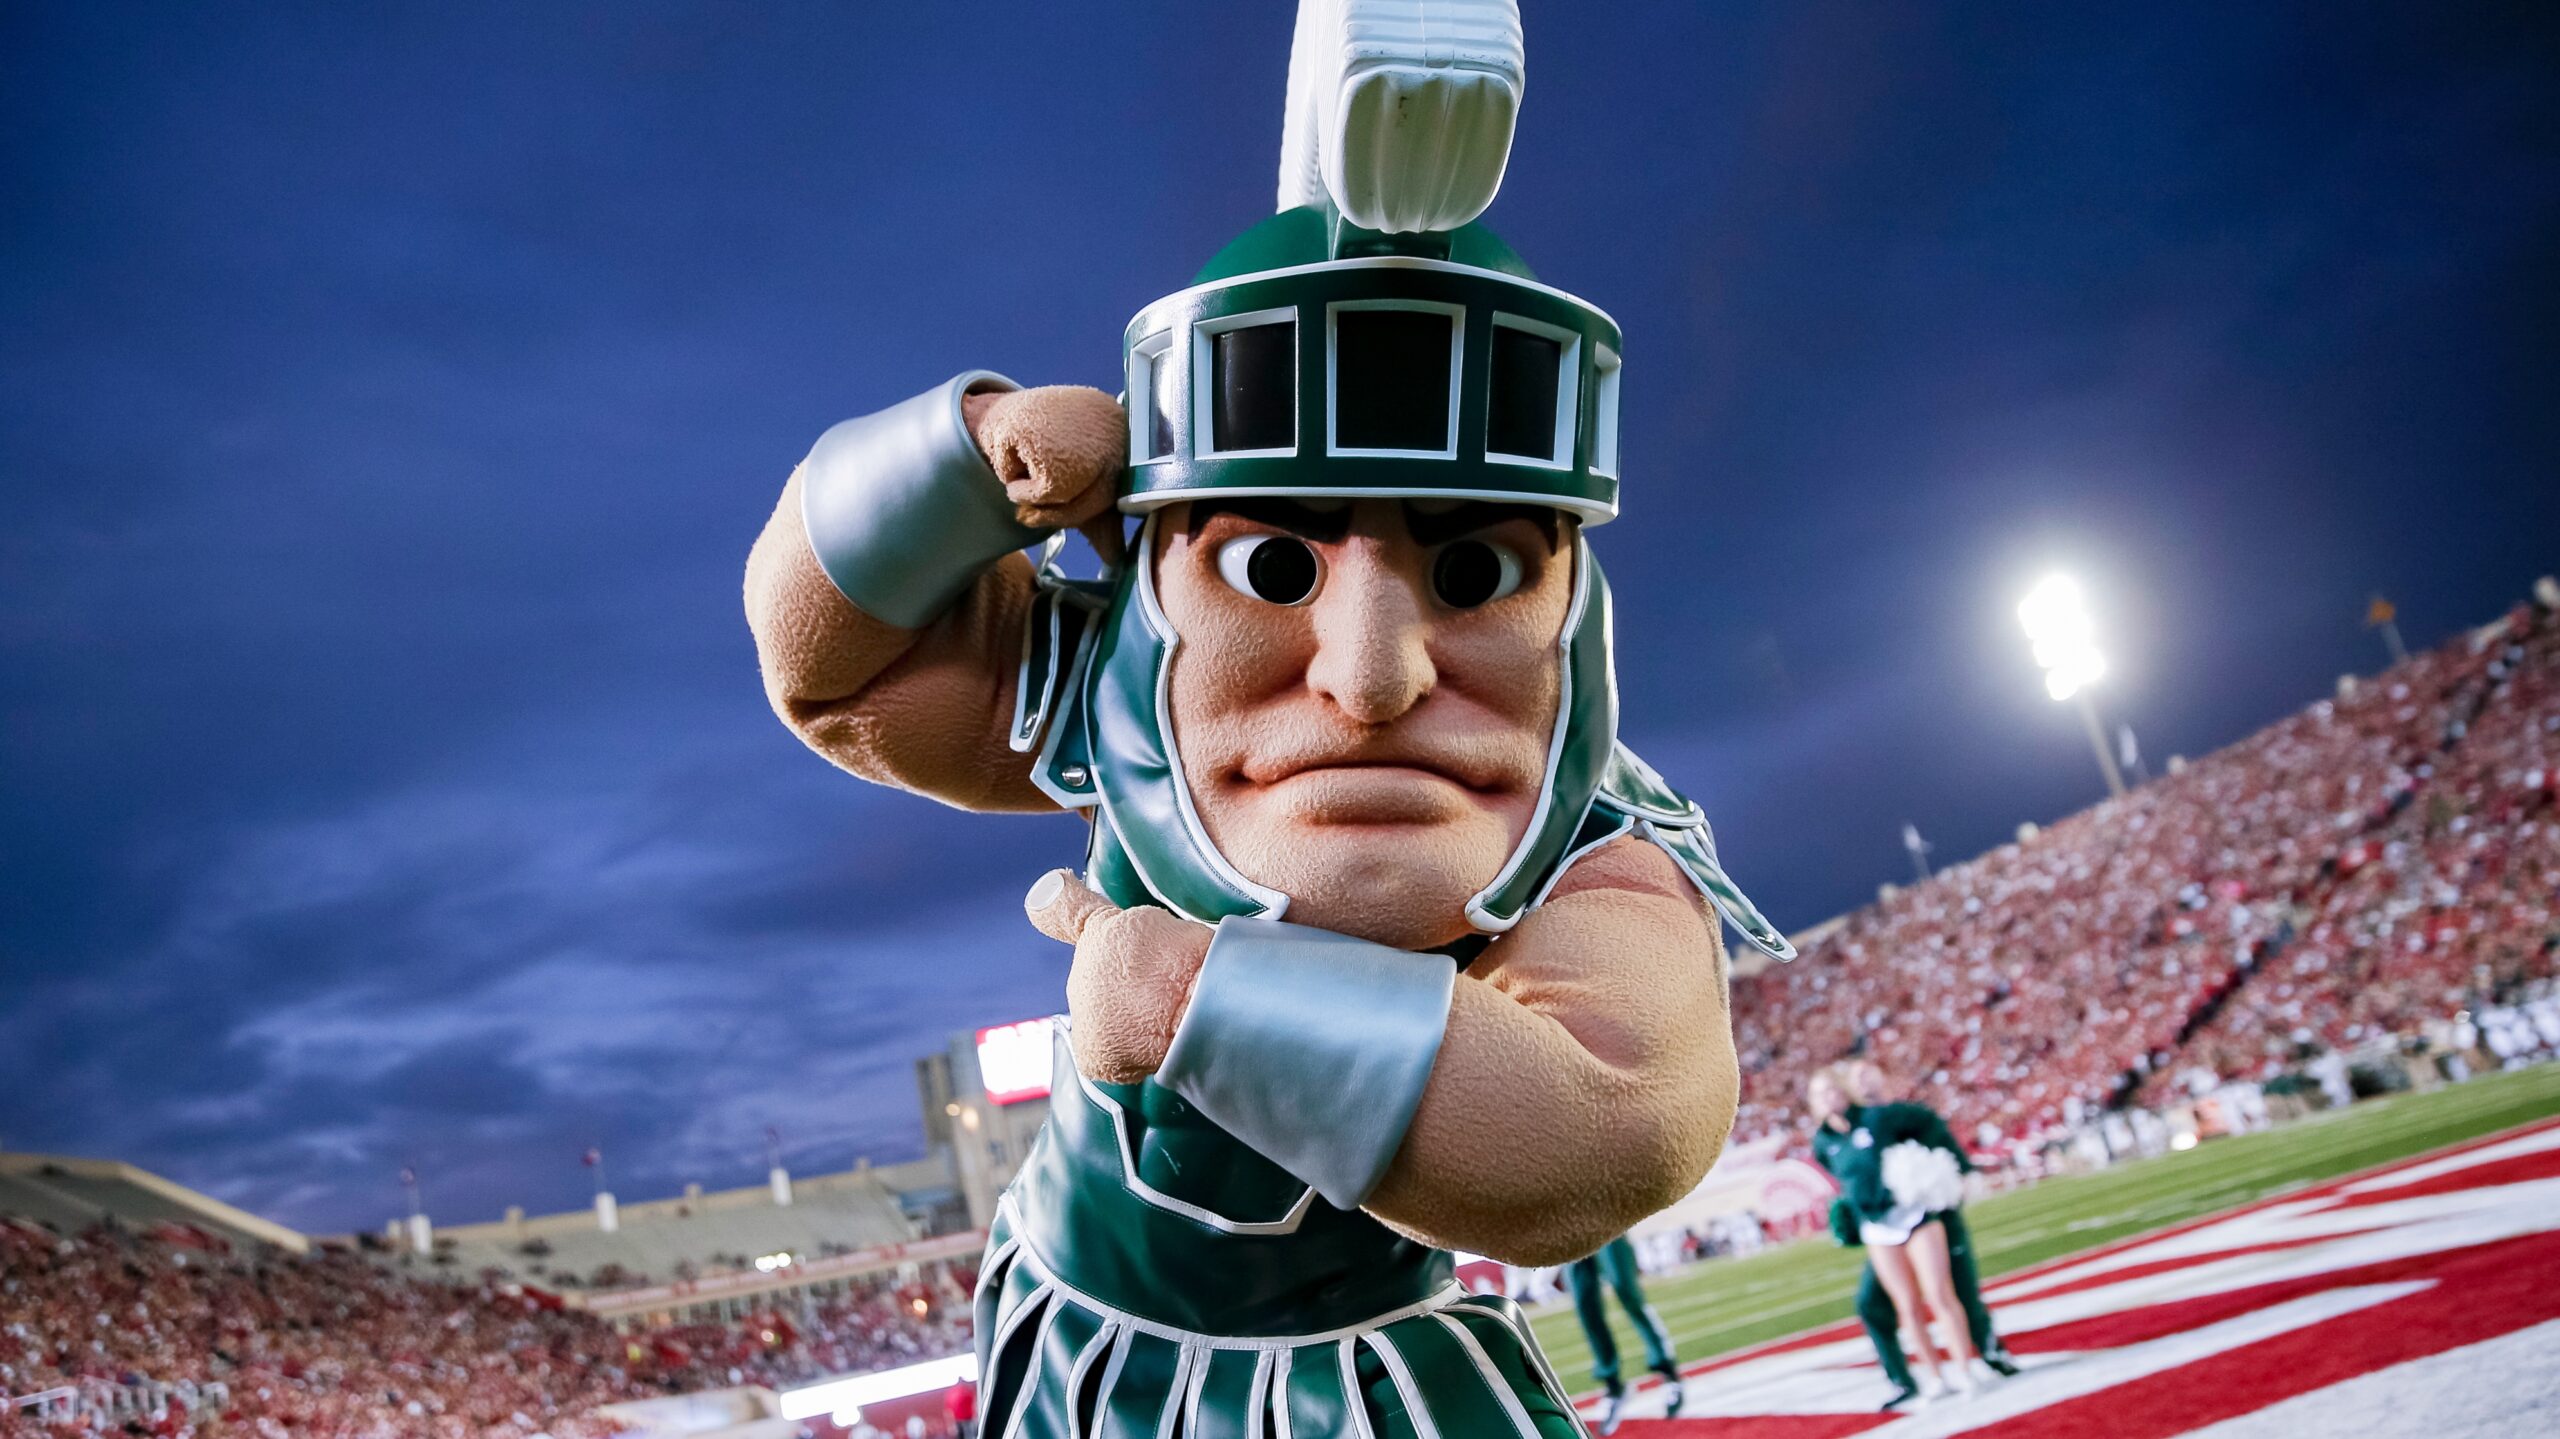 College Football Week 4 Promos: Win $205 if Michigan State Scores a TD, More! article feature image